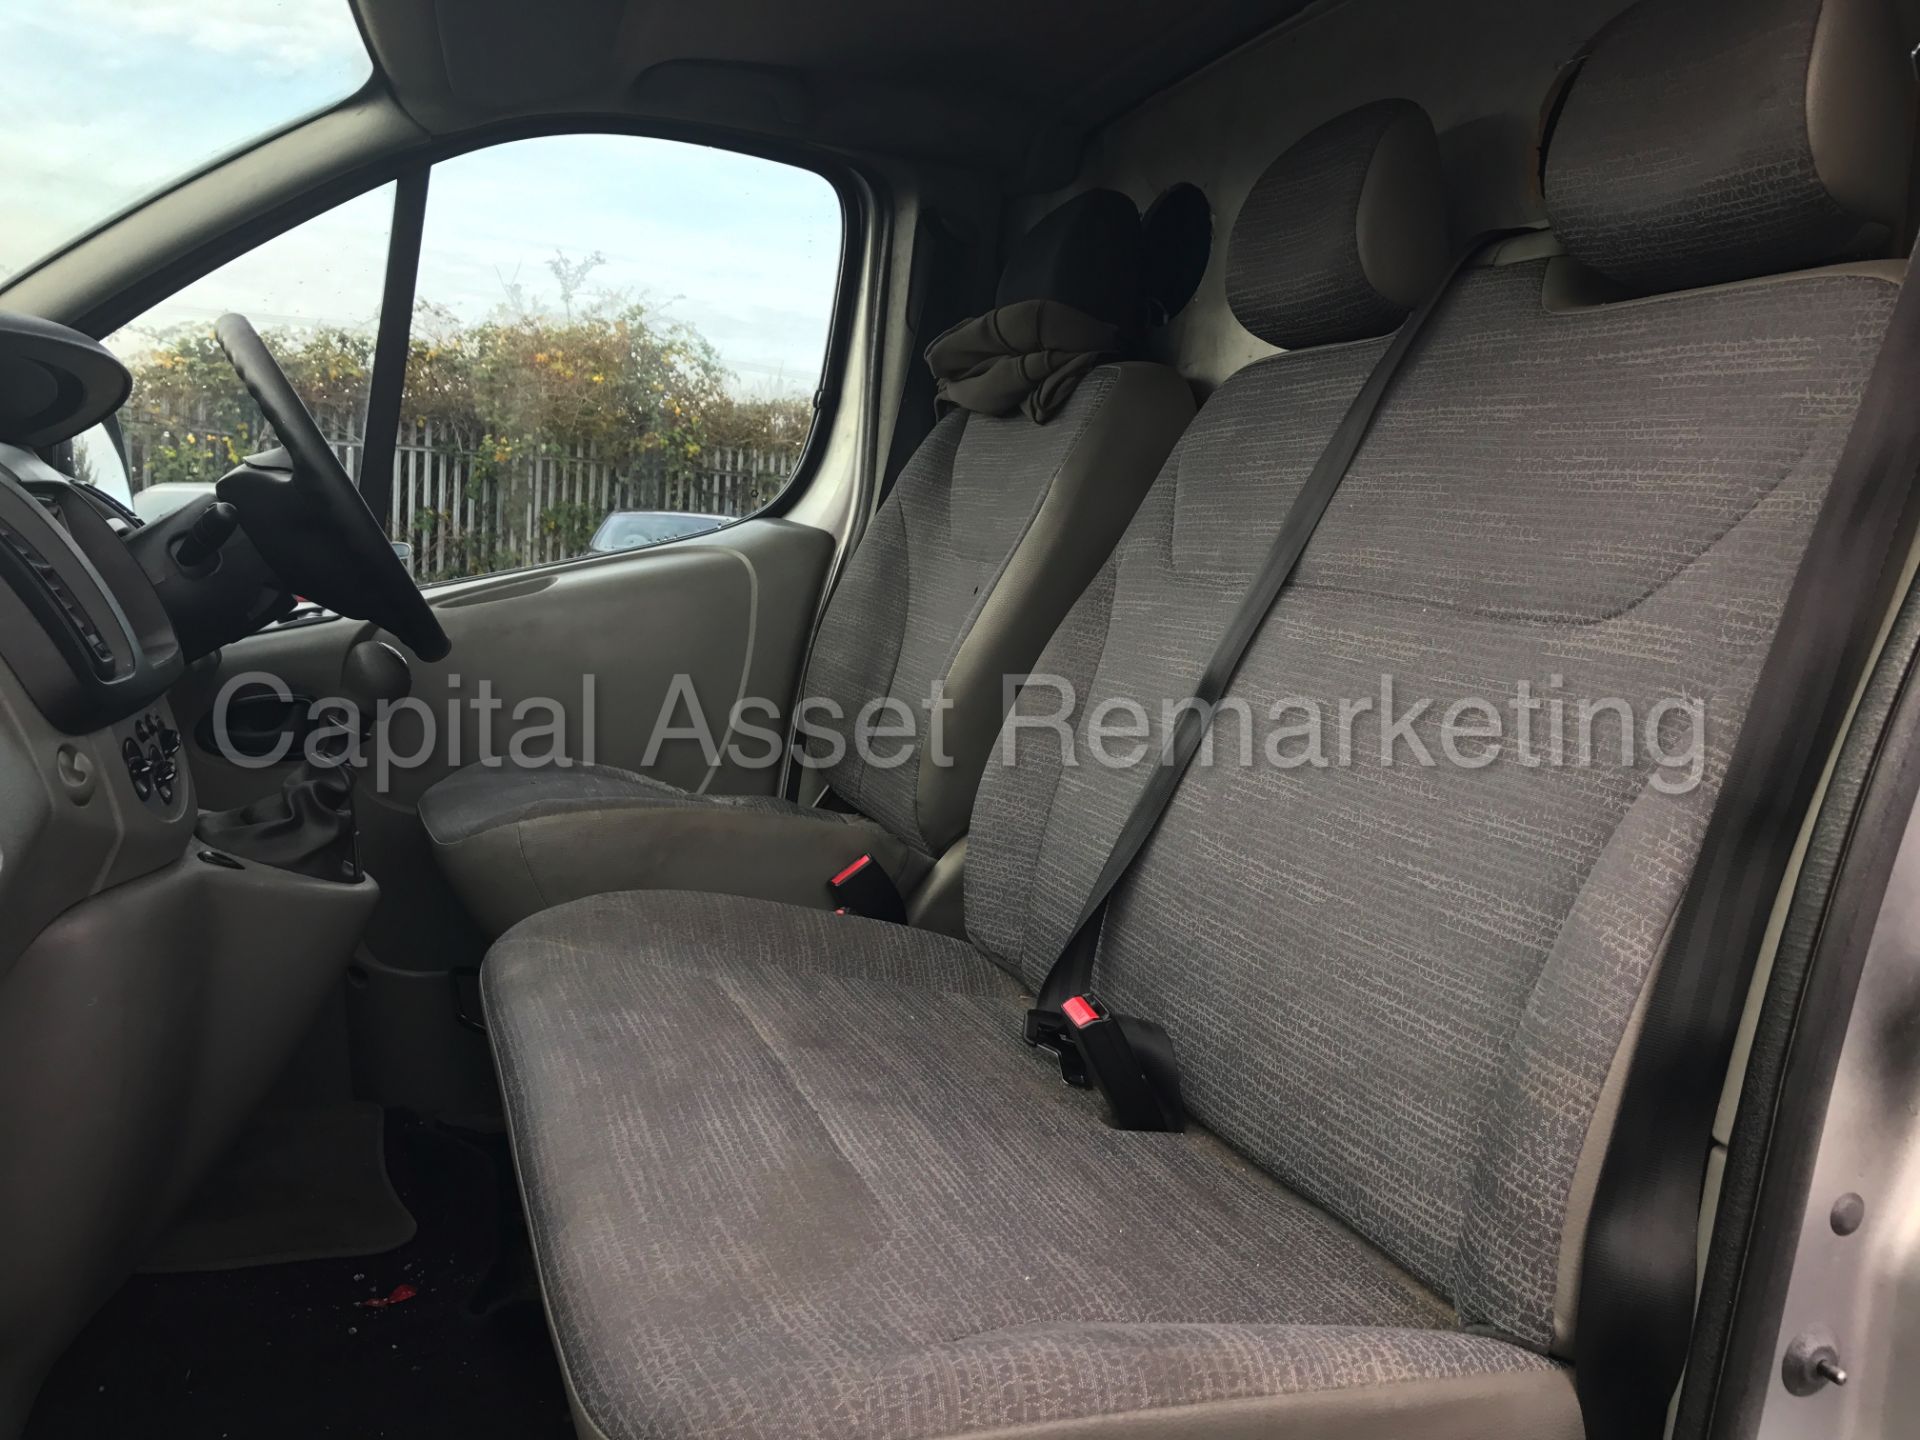 RENAULT TRAFIC LL29 DCI 115 (2010 MODEL) '2.0 DCI - 115 PS - 6 SPEED - LWB' **AIR CON** - Image 15 of 20